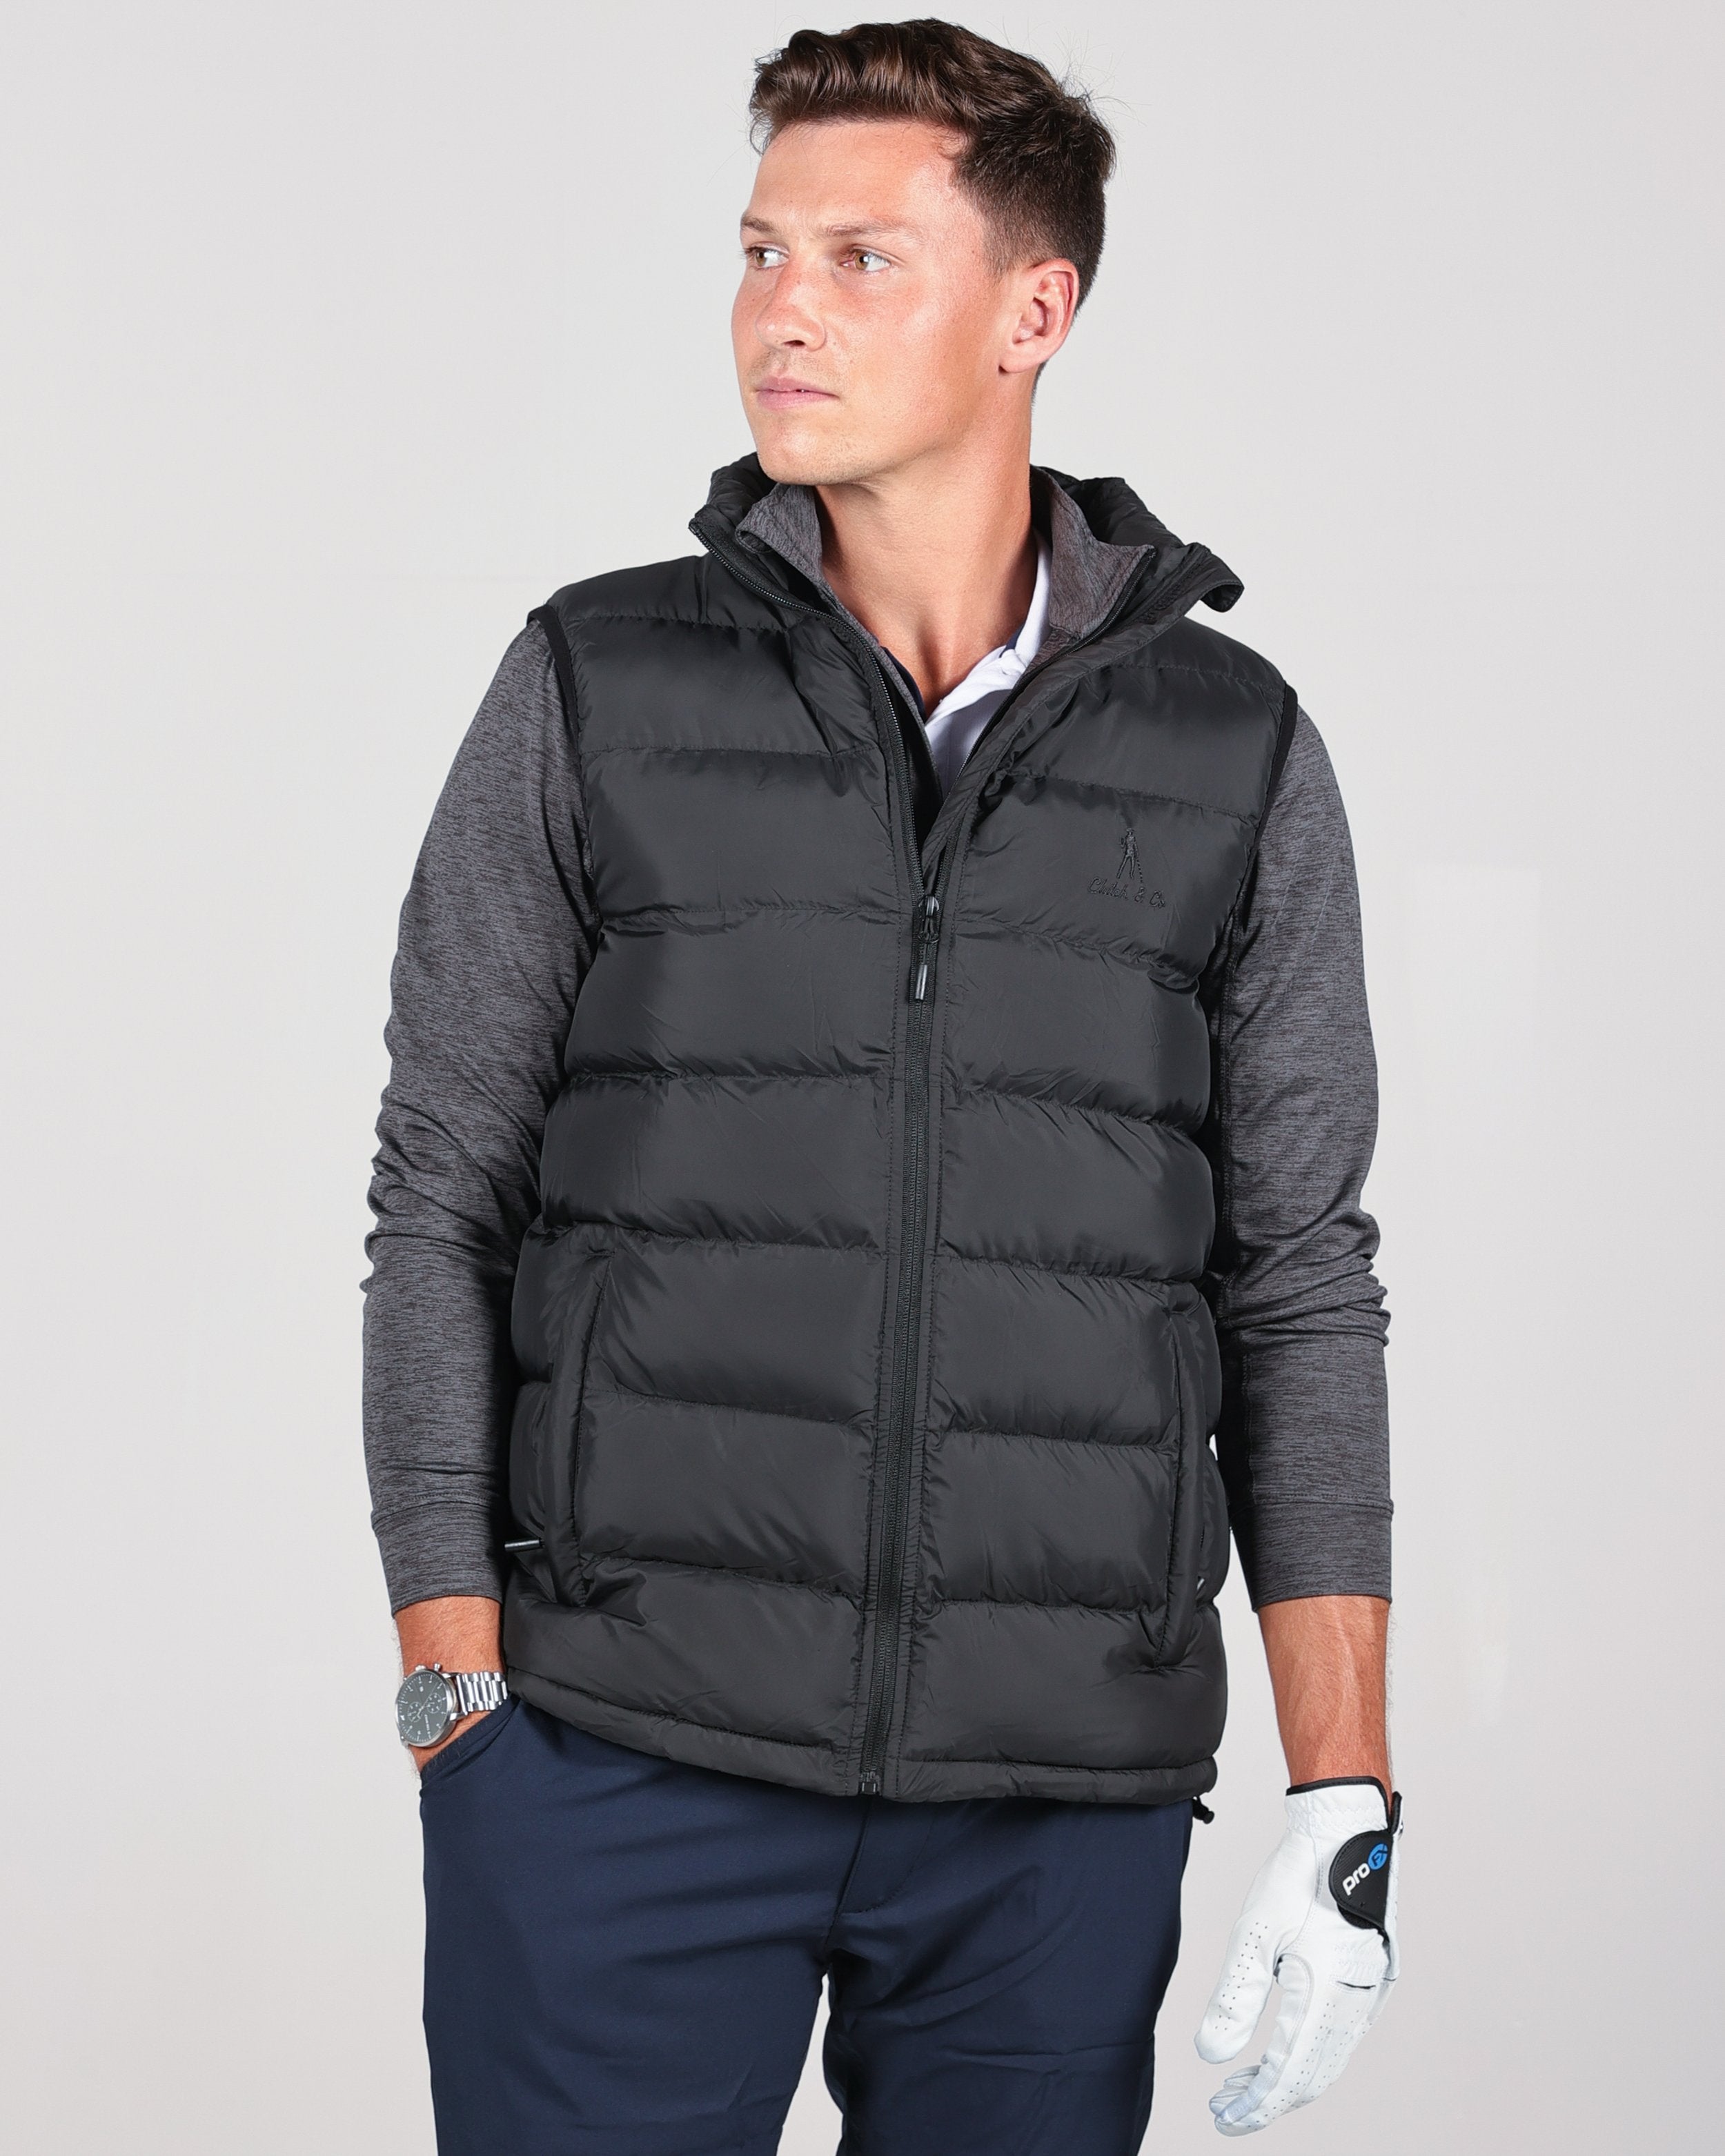 Beige Slim Fit Puffer Vest for Men by GentWith.com